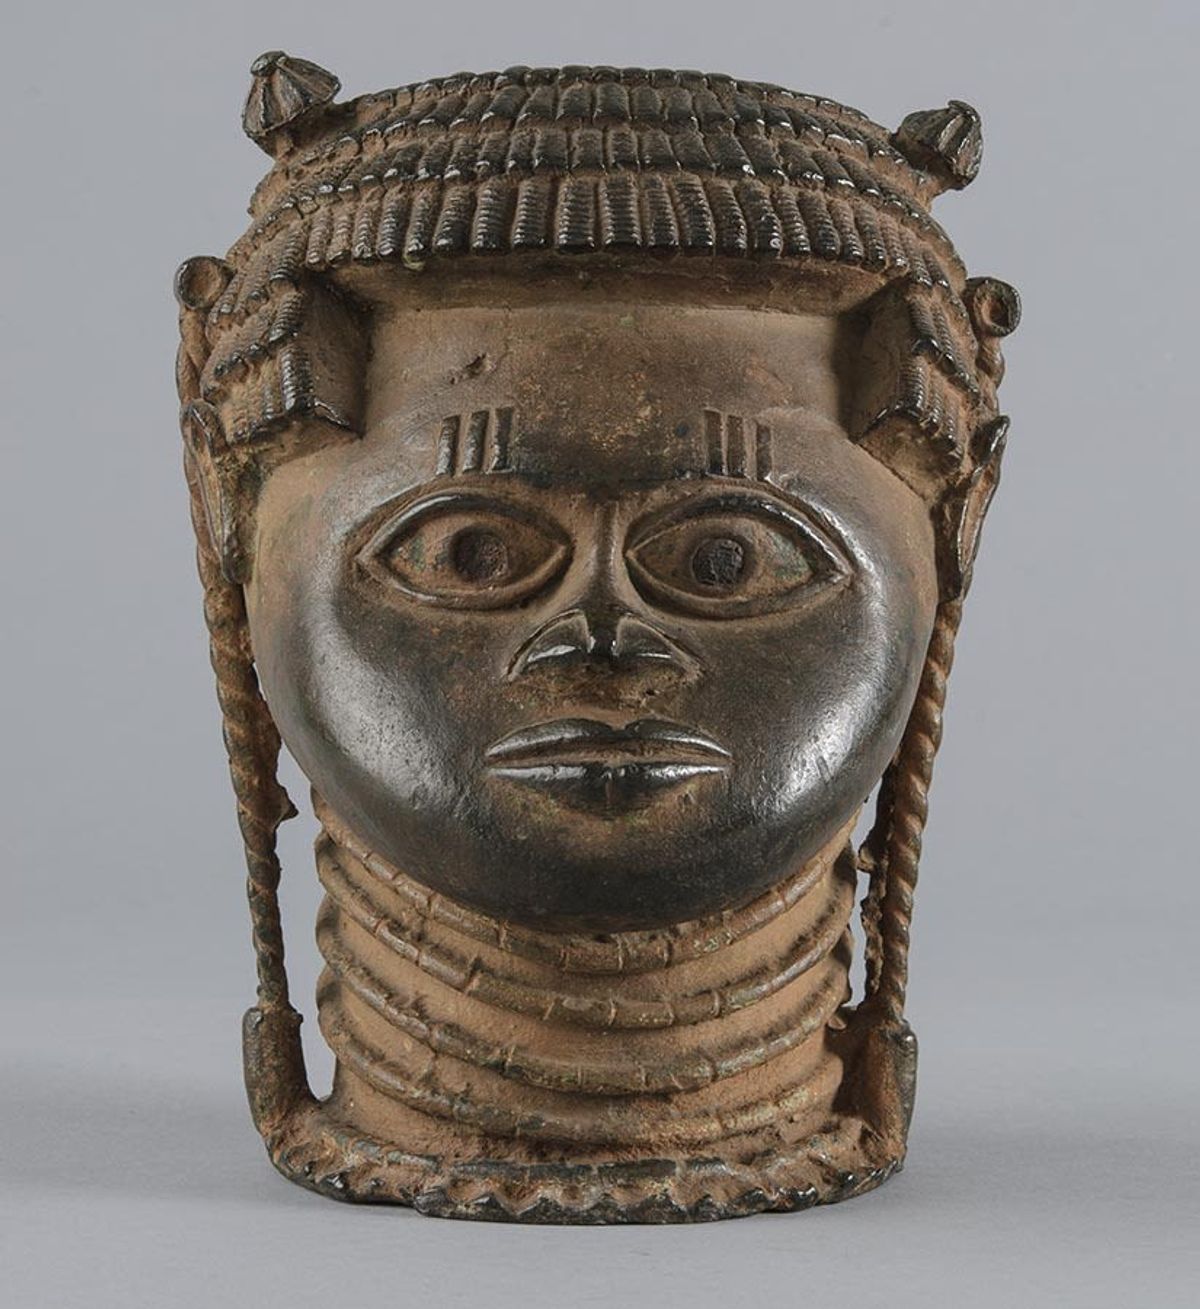 A brass commemorative head currently held in the University of Cambridge's Museum of Archaeology and Anthropology

Courtesy of the Museum of Archaeology and Anthropology